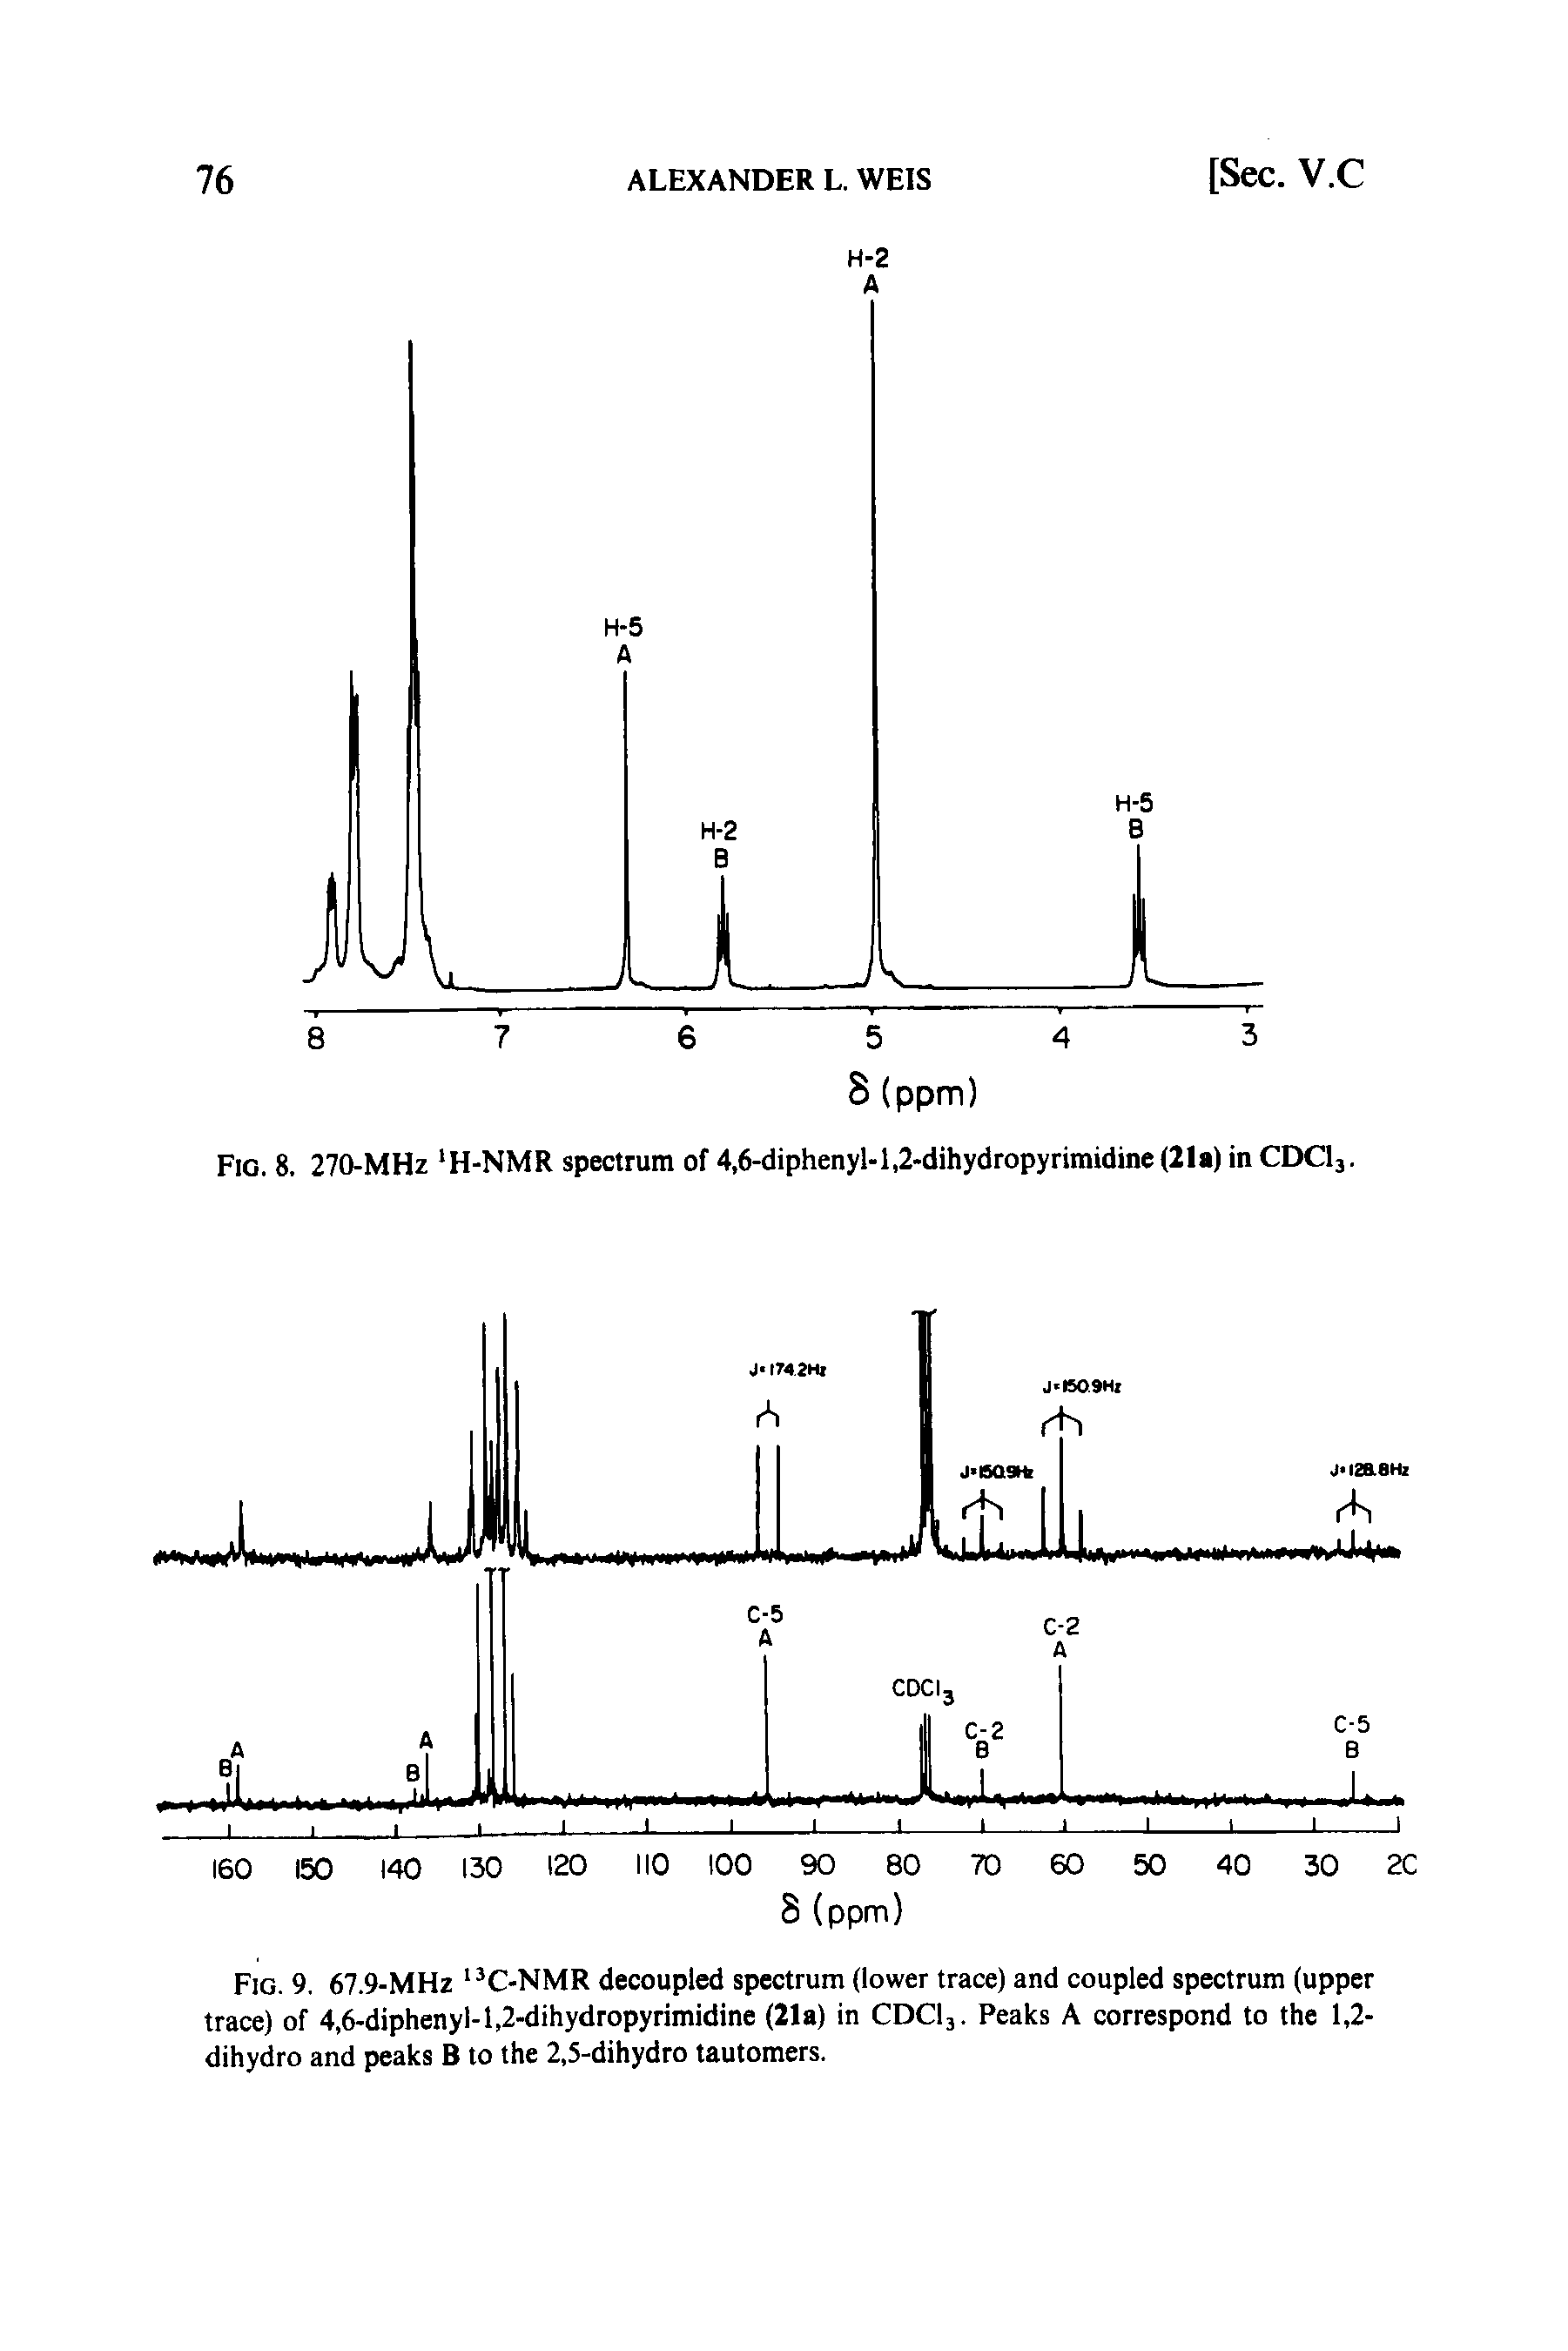 Fig. 9. 67.9-MHz 13C-NMR decoupled spectrum (lower trace) and coupled spectrum (upper trace) of 4,6-diphenyl- 1,2-dihydropyrimidine (21a) in CDC13. Peaks A correspond to the 1,2-dihydro and peaks B to the 2,5-dihydro tautomers.